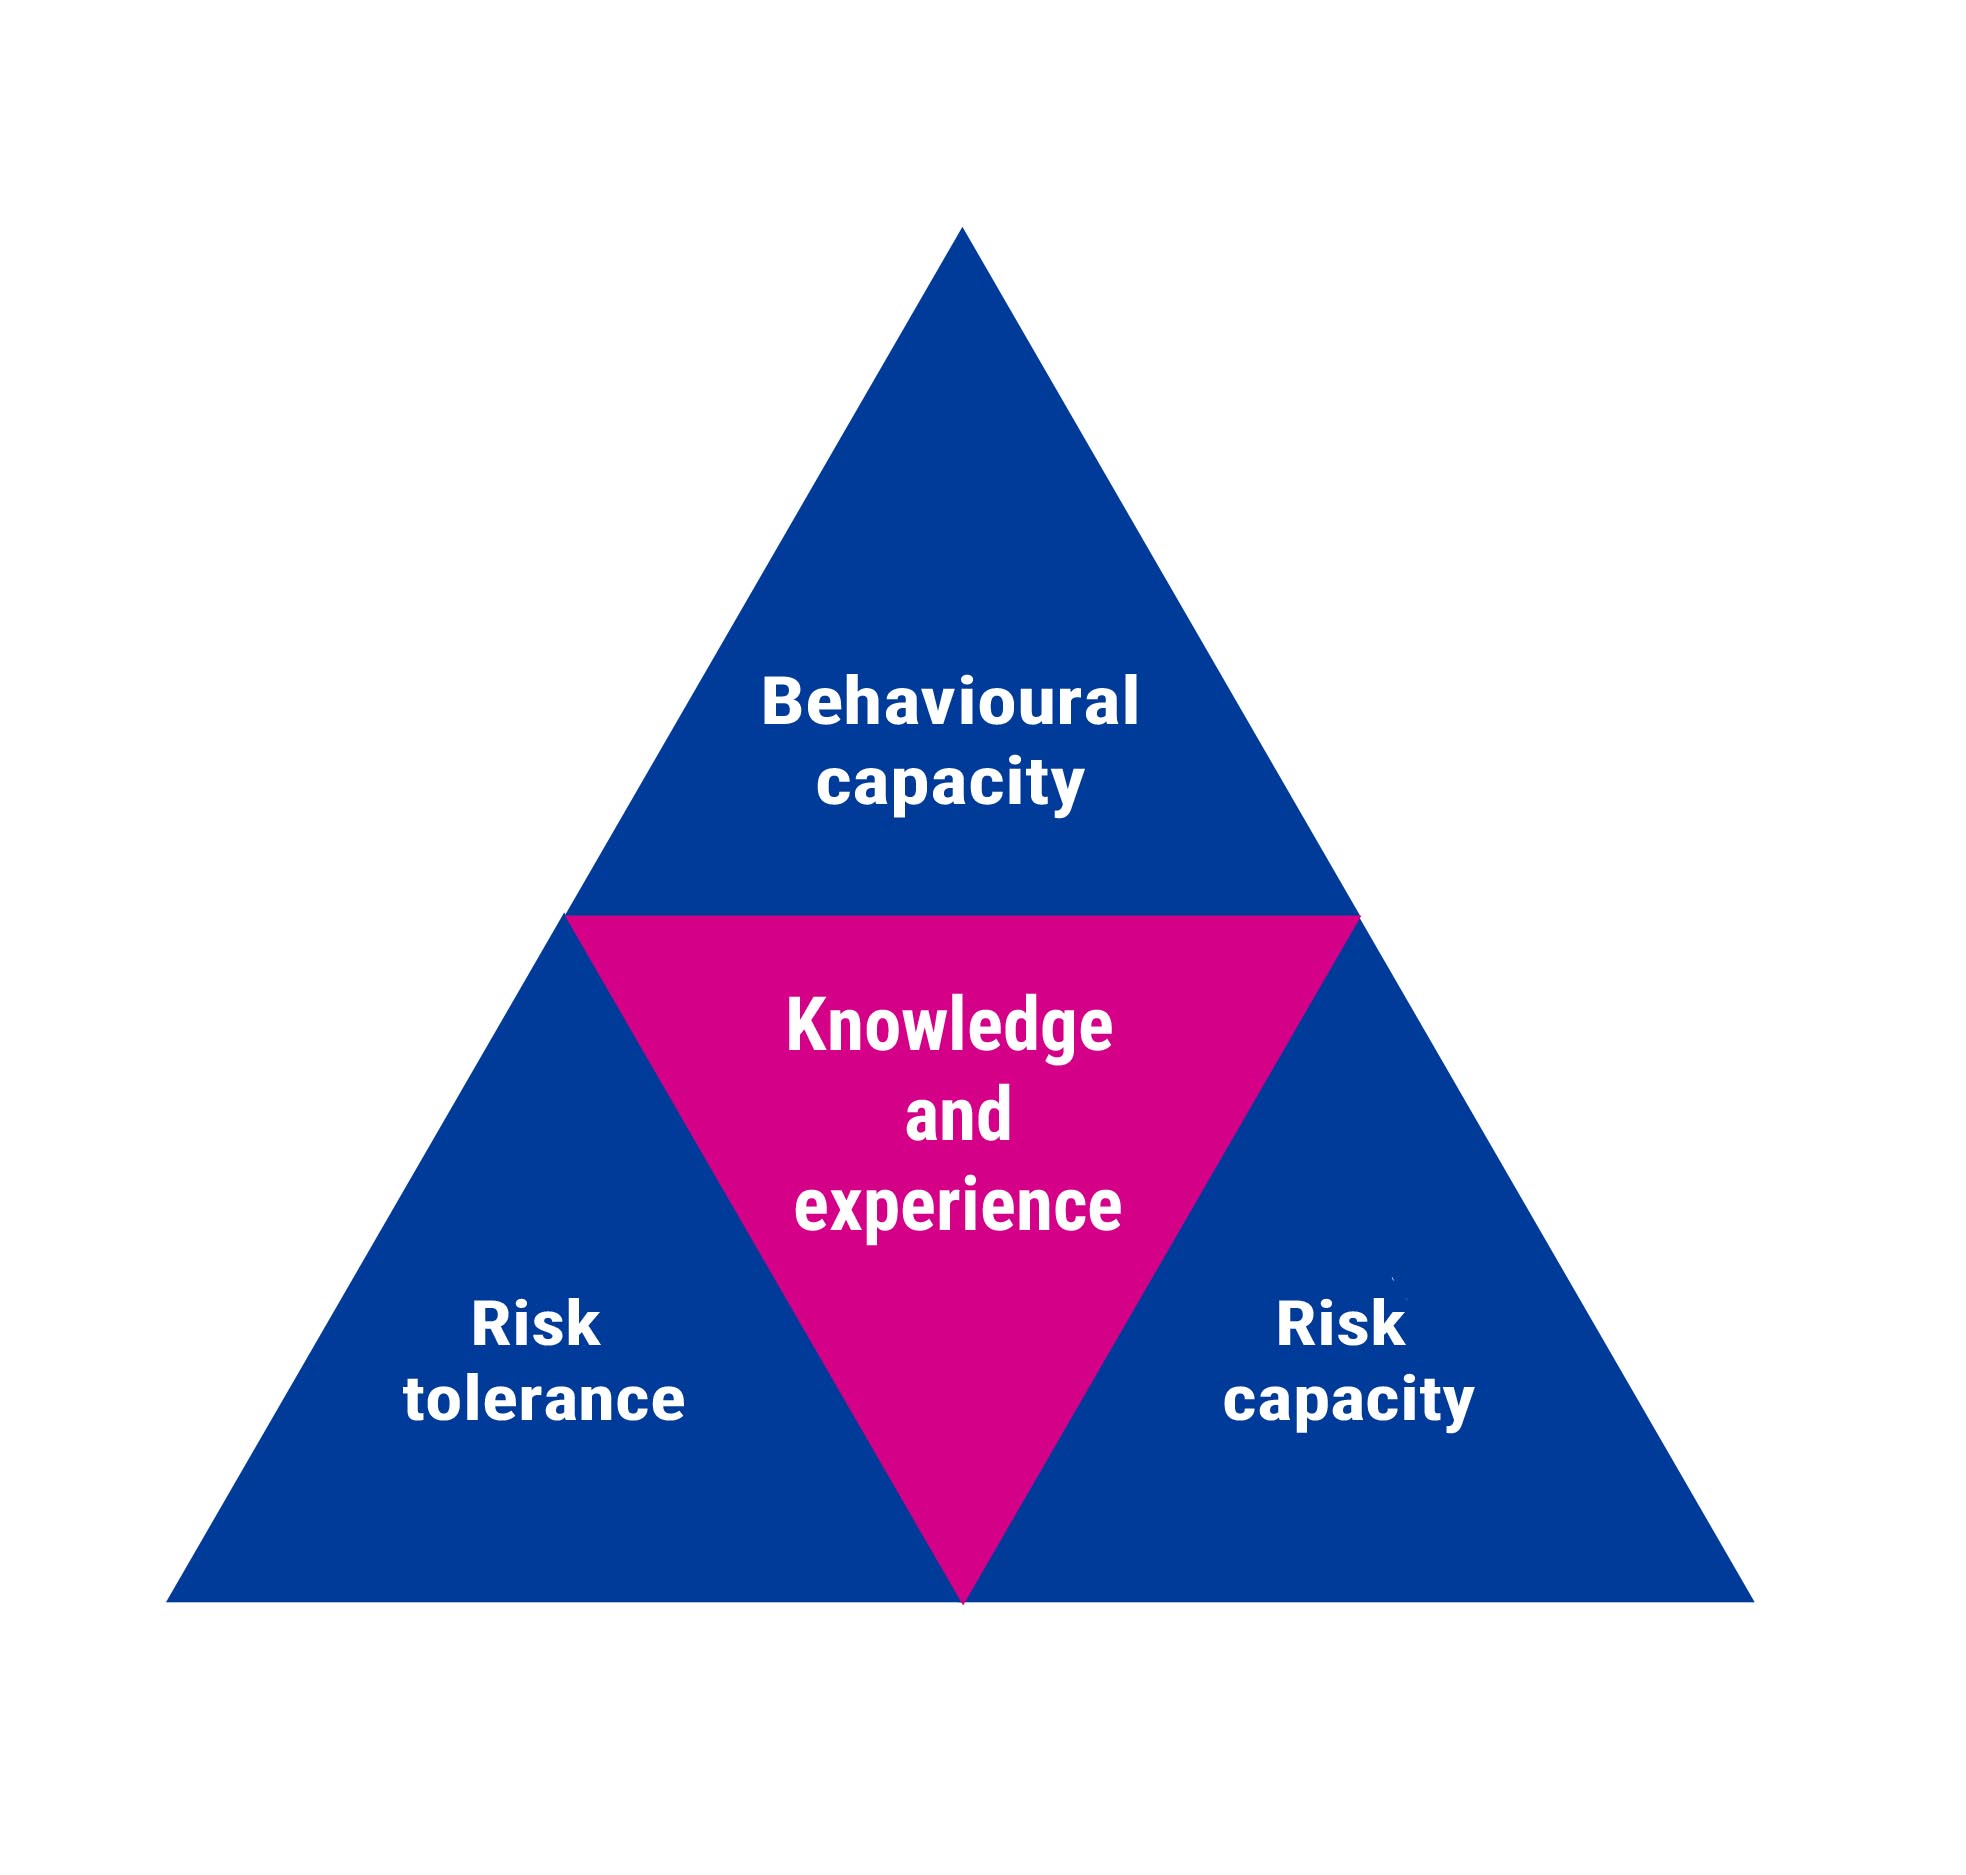 1 Components of a Suitable Risk Level: Risk Tolerance and Capacity form the foundation, with Knowledge and Experience and Behavioural Capacity acting as caps or limits where necessary.